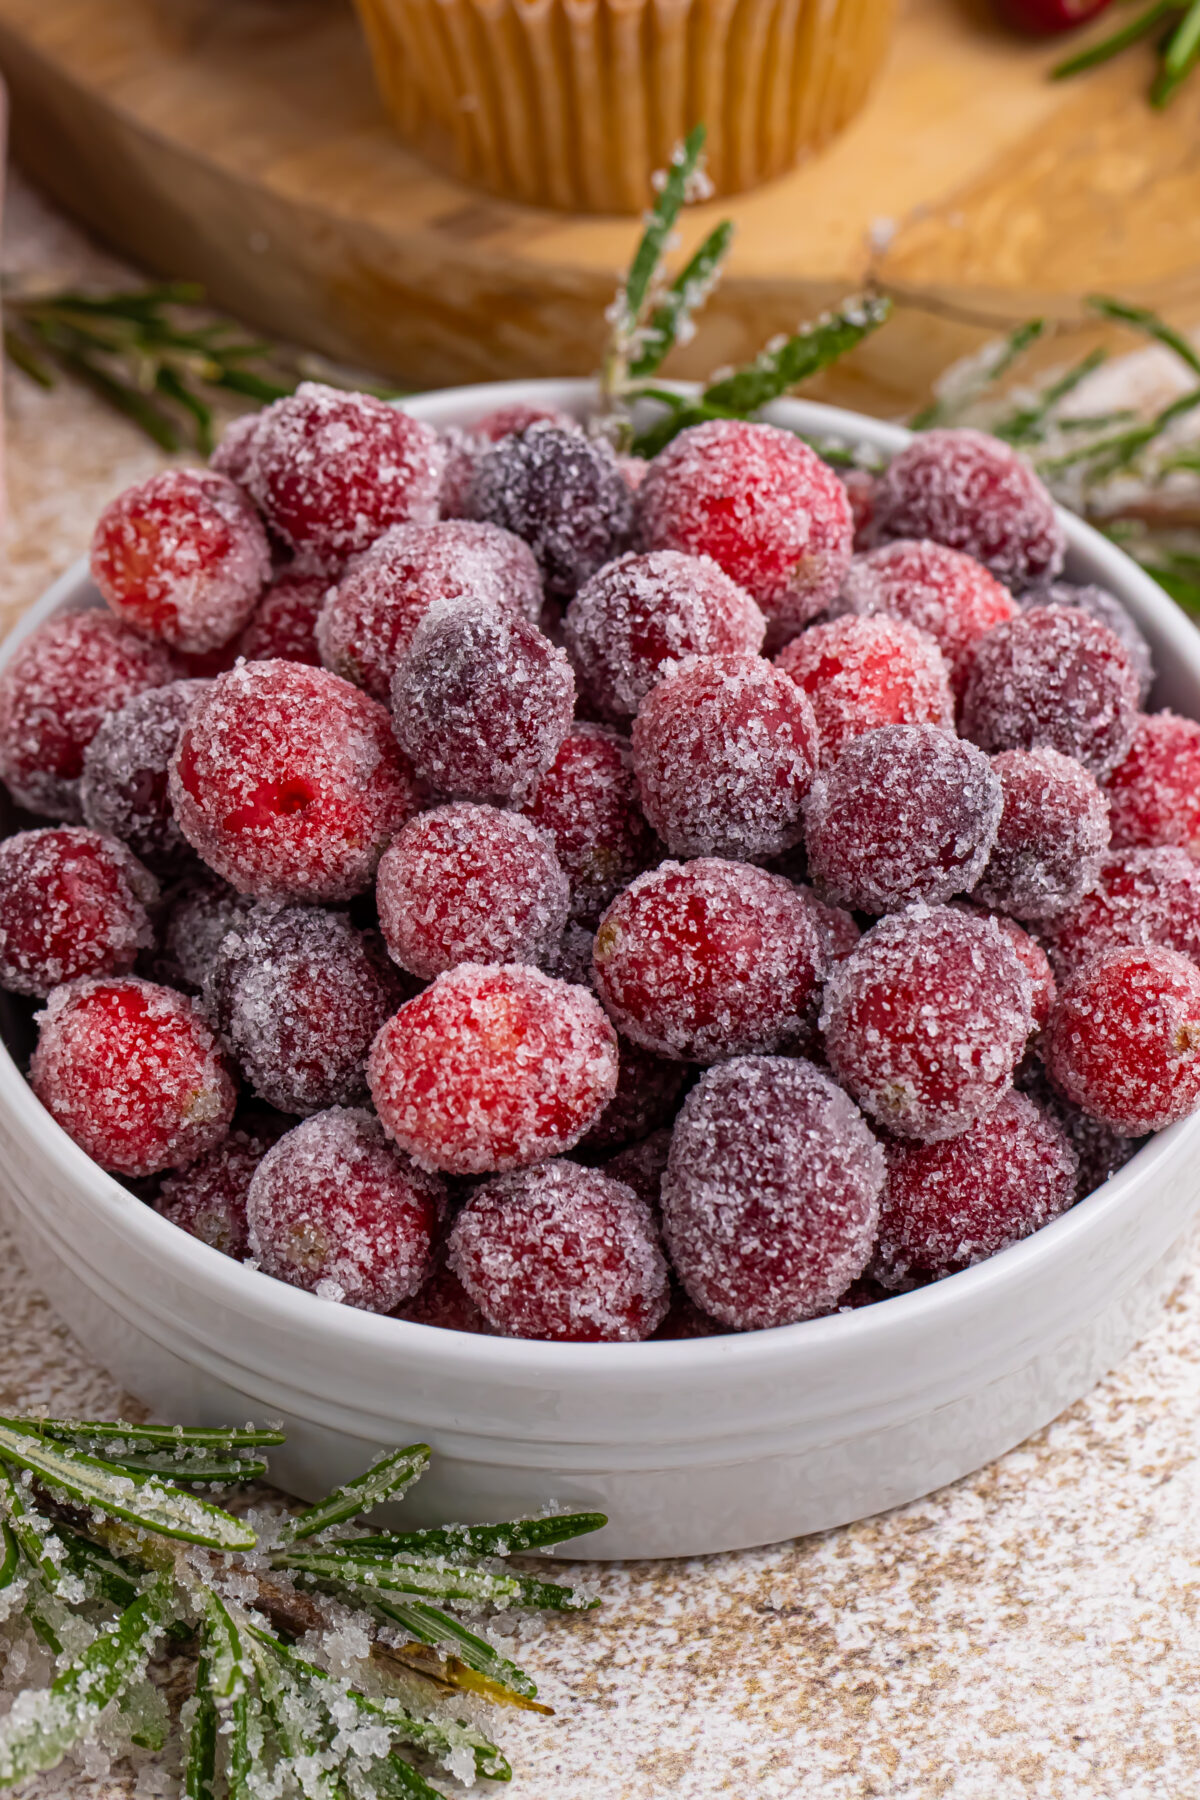 Make beautiful and delicious sugared cranberries from the comfort of your own kitchen. You'll be making festive dessert garnishes in no time.